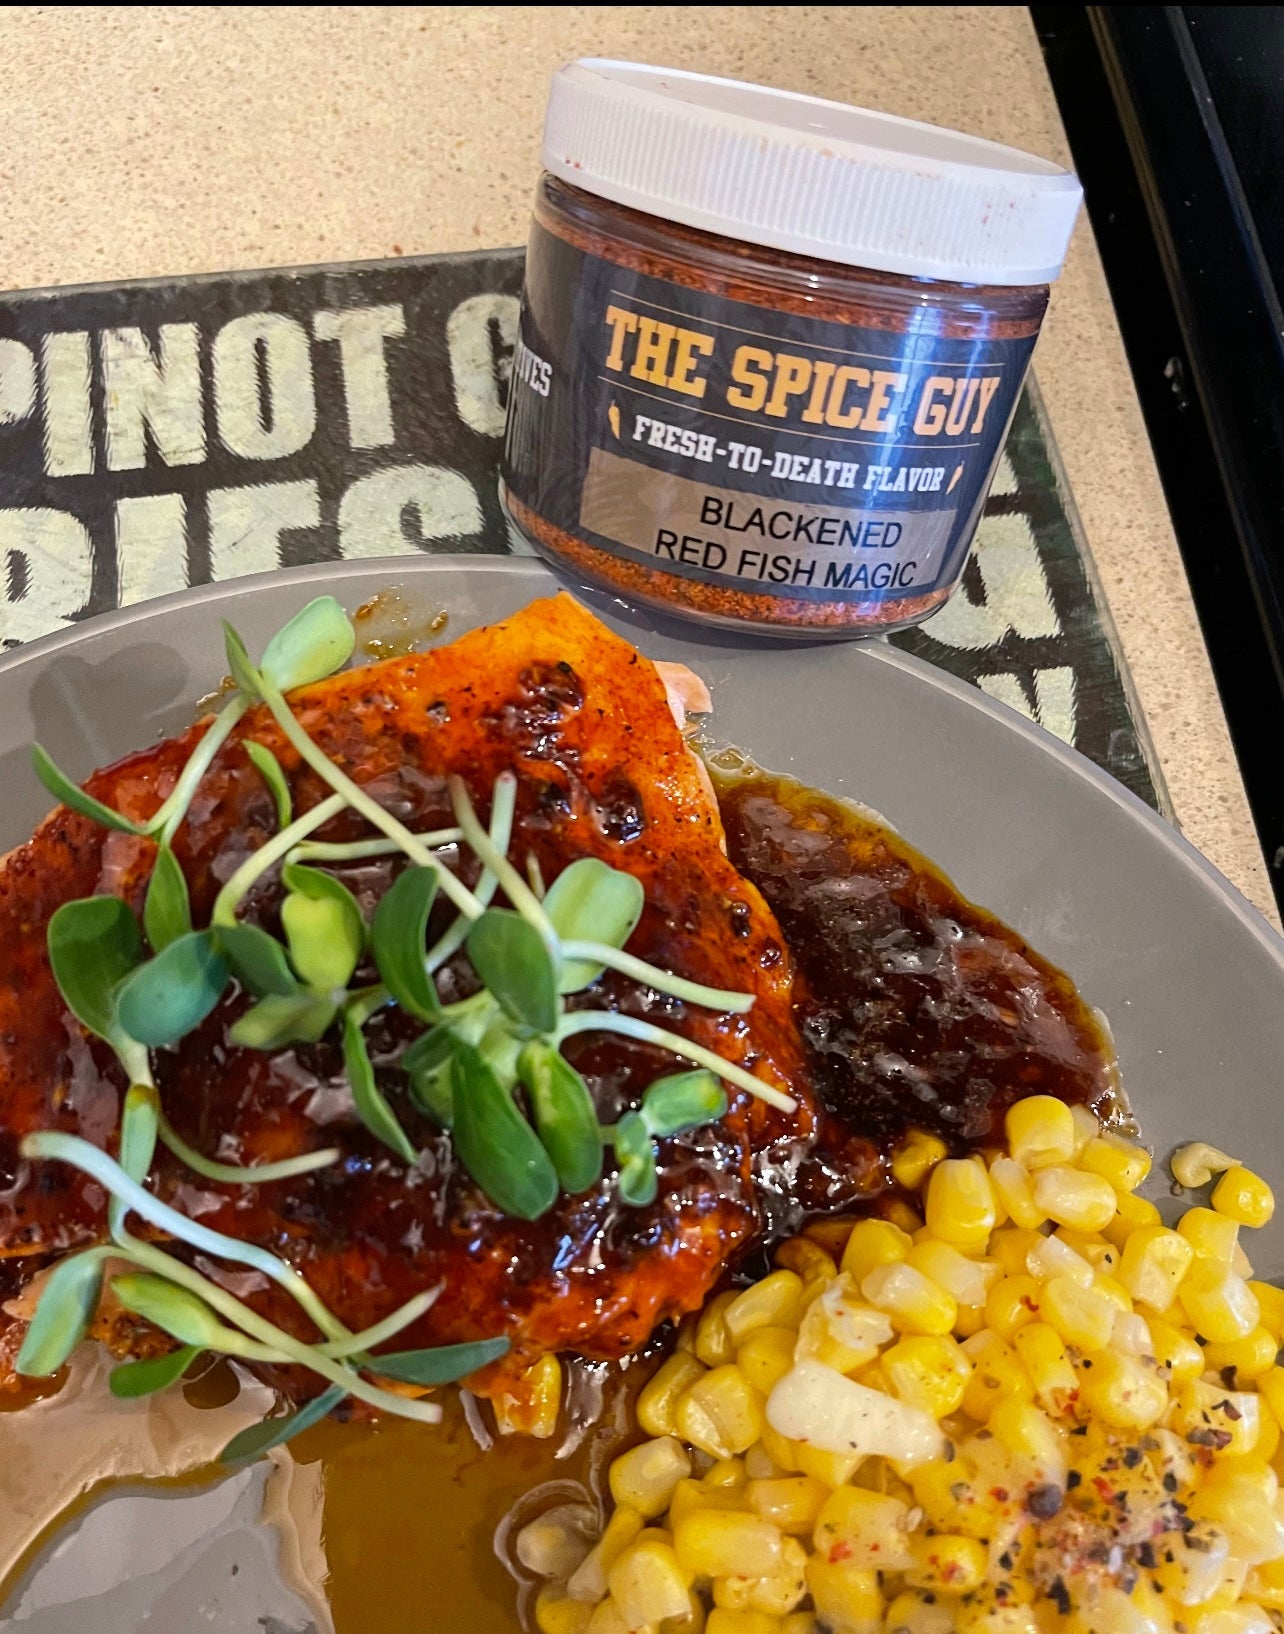 
                  
                    Blackened Red Fish Magic - The Spice Guy
                  
                